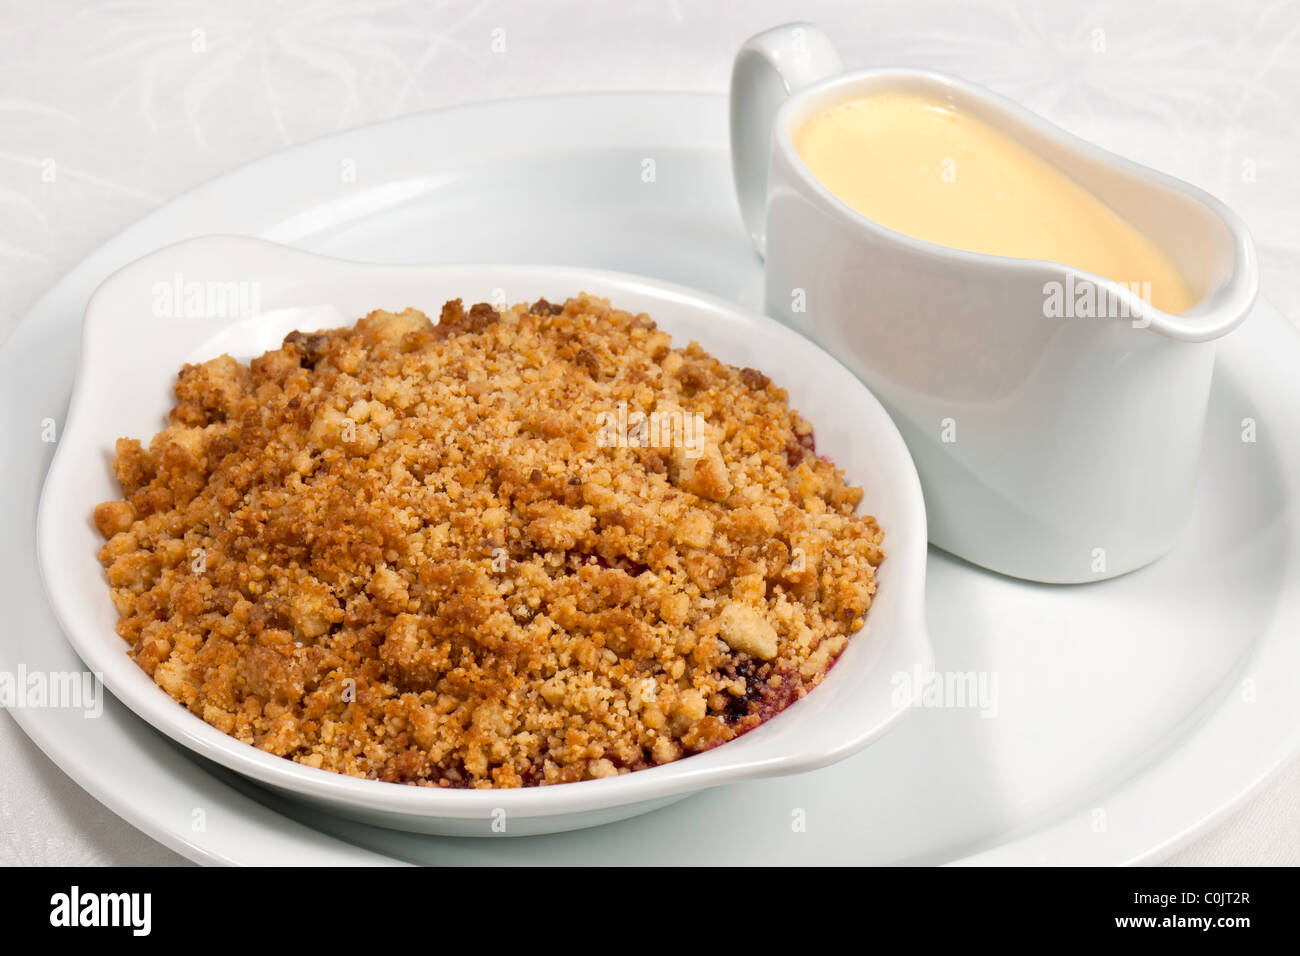 Chef's Presentation dish - Apple and blackberry crumble with custard. Stock Photo